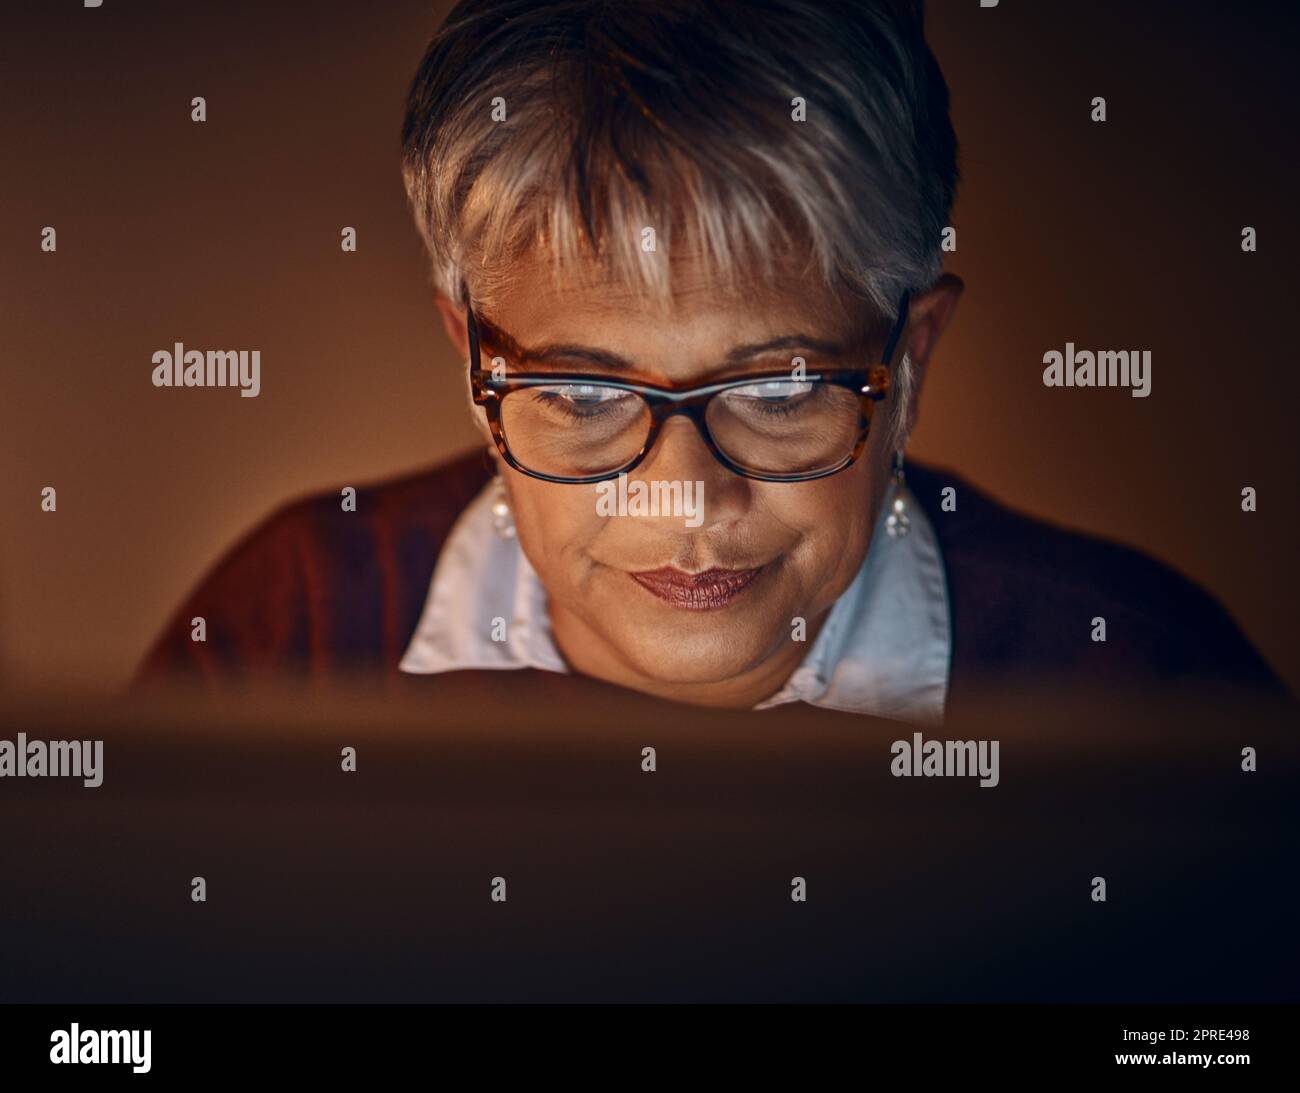 Shes got the determination to beat her deadlines. a mature businesswoman working late in an office. Stock Photo